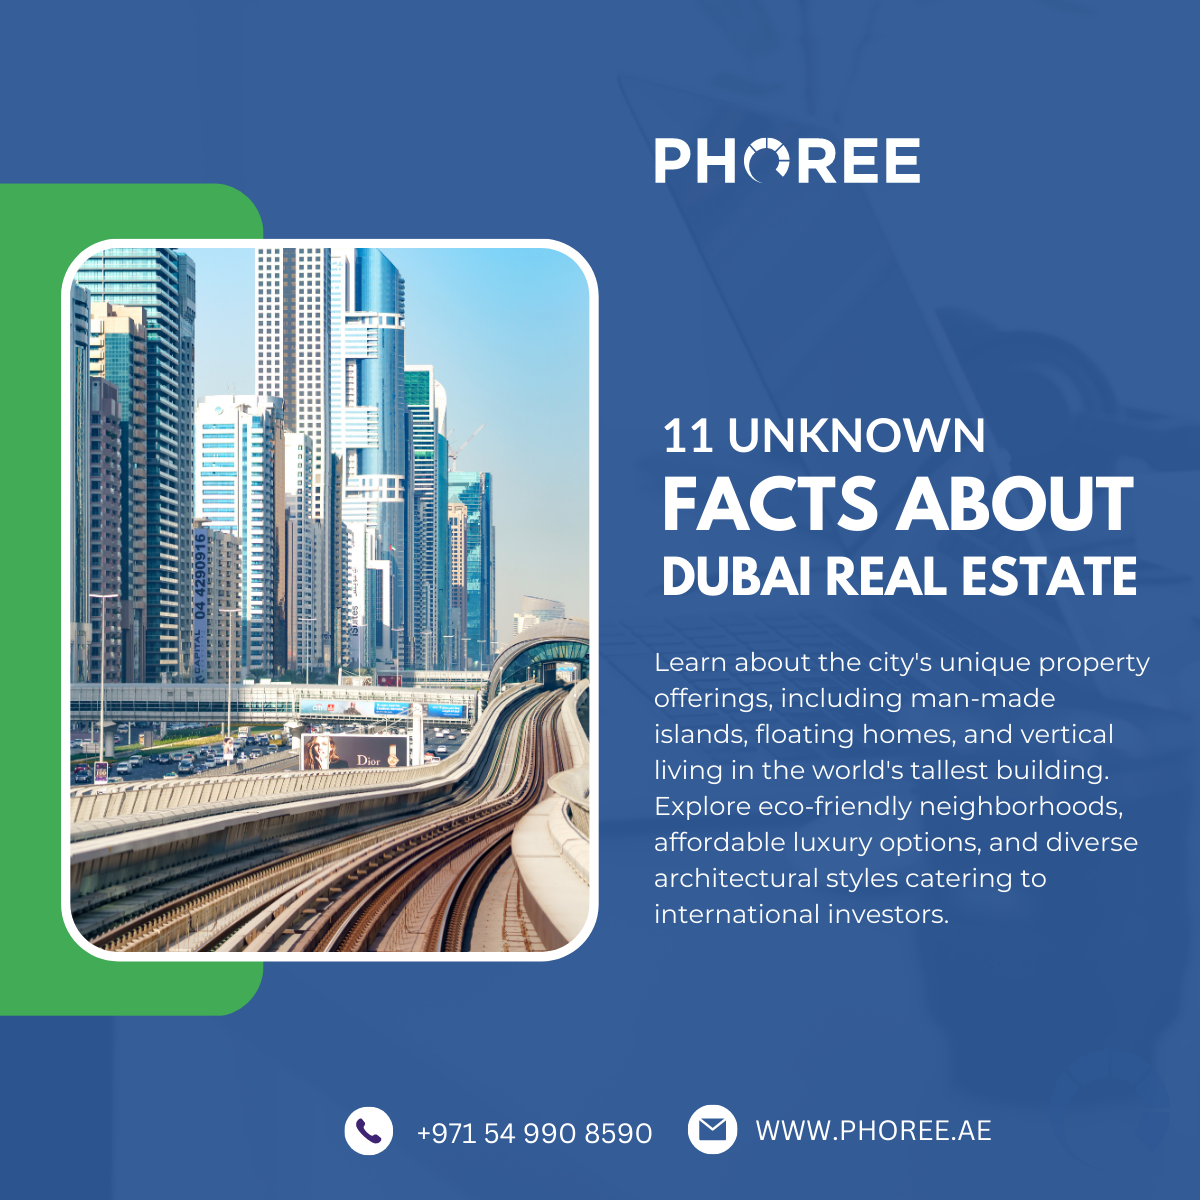 11 UNKNOWN FACTS ABOUT DUBAI REAL ESTATE